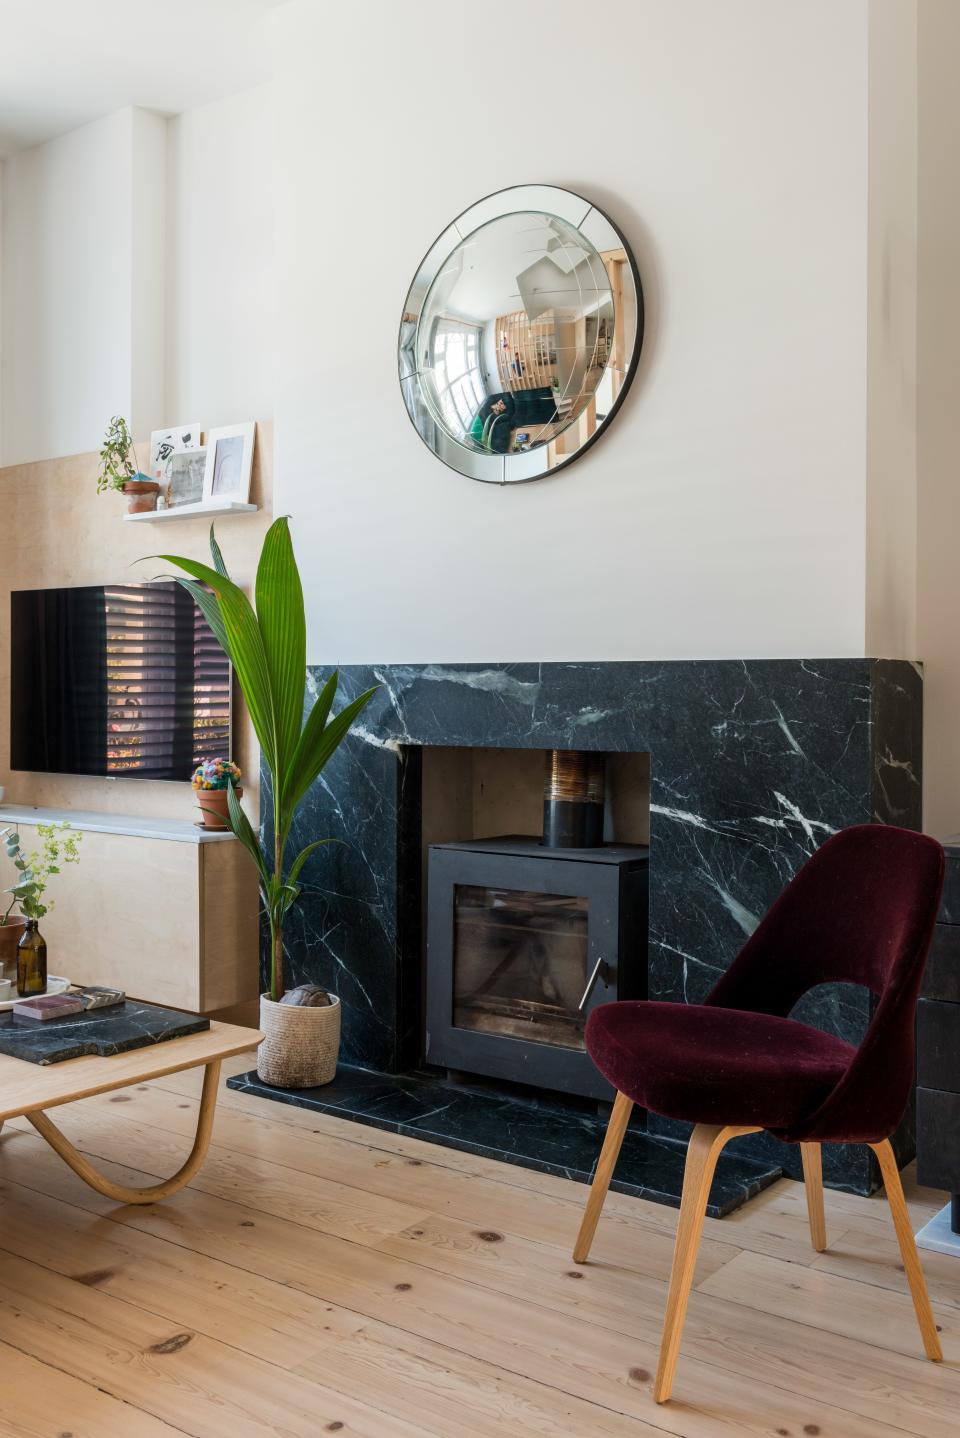 Also found in the one-bedroom on Epirus Road is a simple but so luxe hearth and an awesome plywood TV unit.